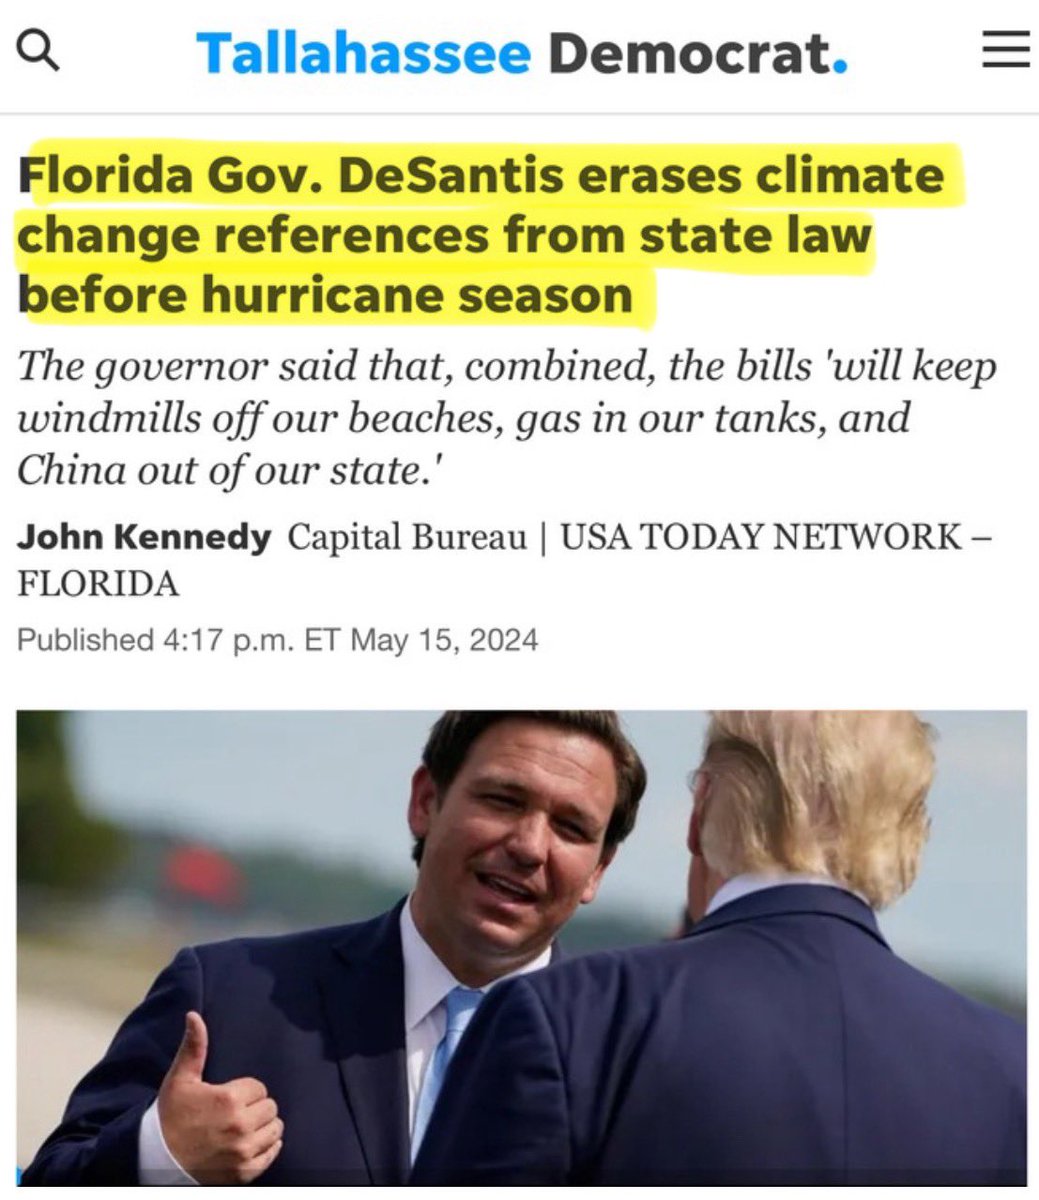 Fossil fuel companies don’t like competing with clean energy. So they donated to Ron DeSantis who signed a law that bans offshore wind, eliminates energy efficiency grant programs and deletes any reference to “climate change” from state statute. GOP = Profits over people always